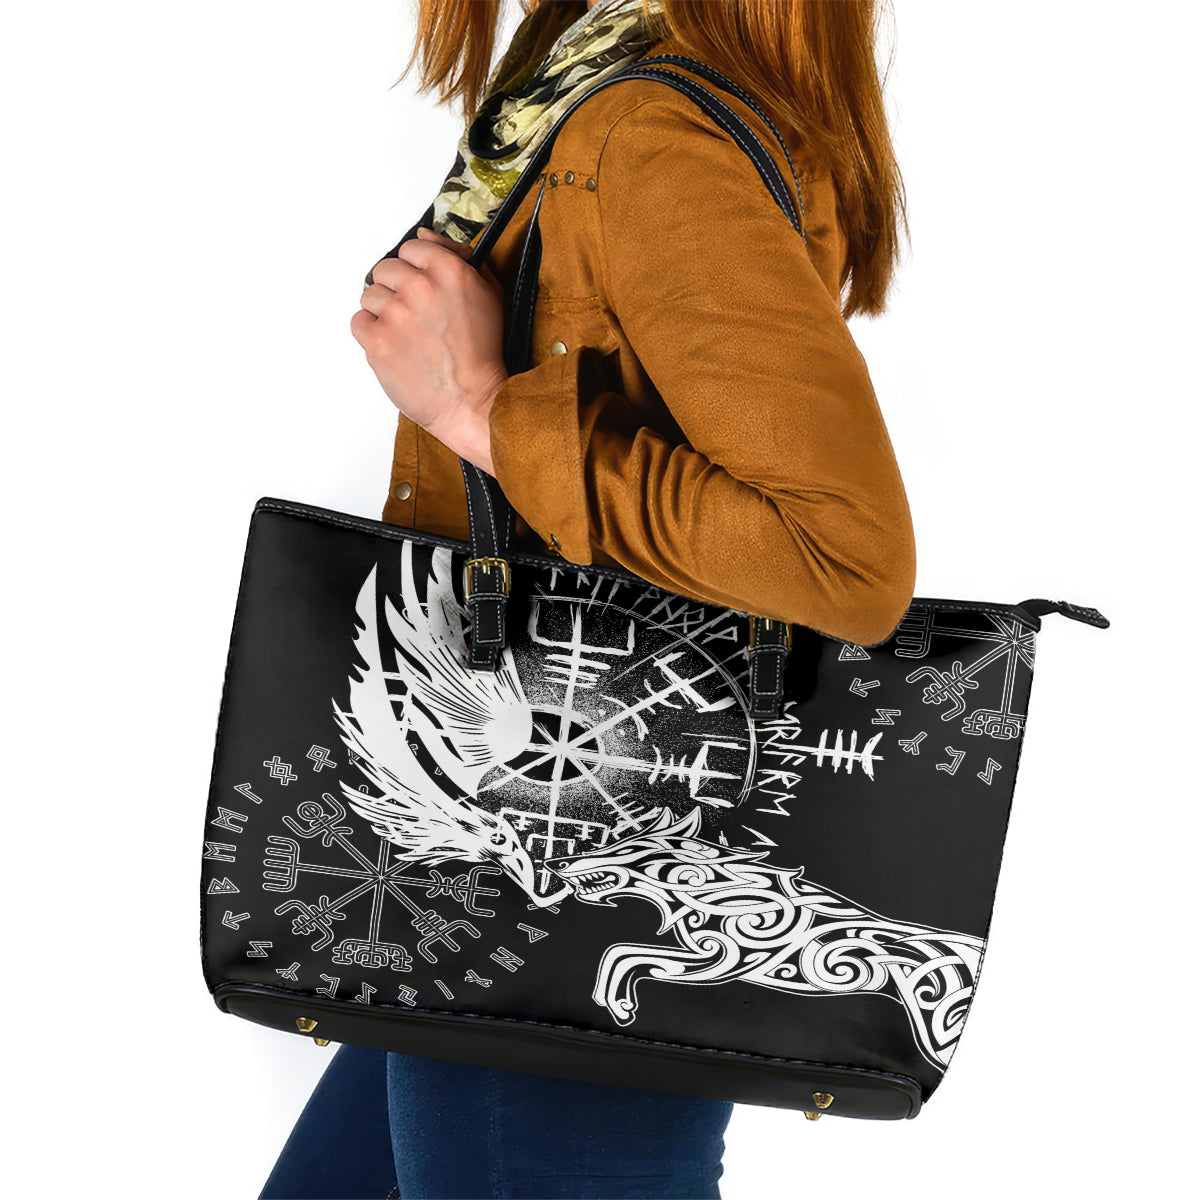 Vikings Raven and Wolf Leather Tote Bag with Aegishjalmur Unique